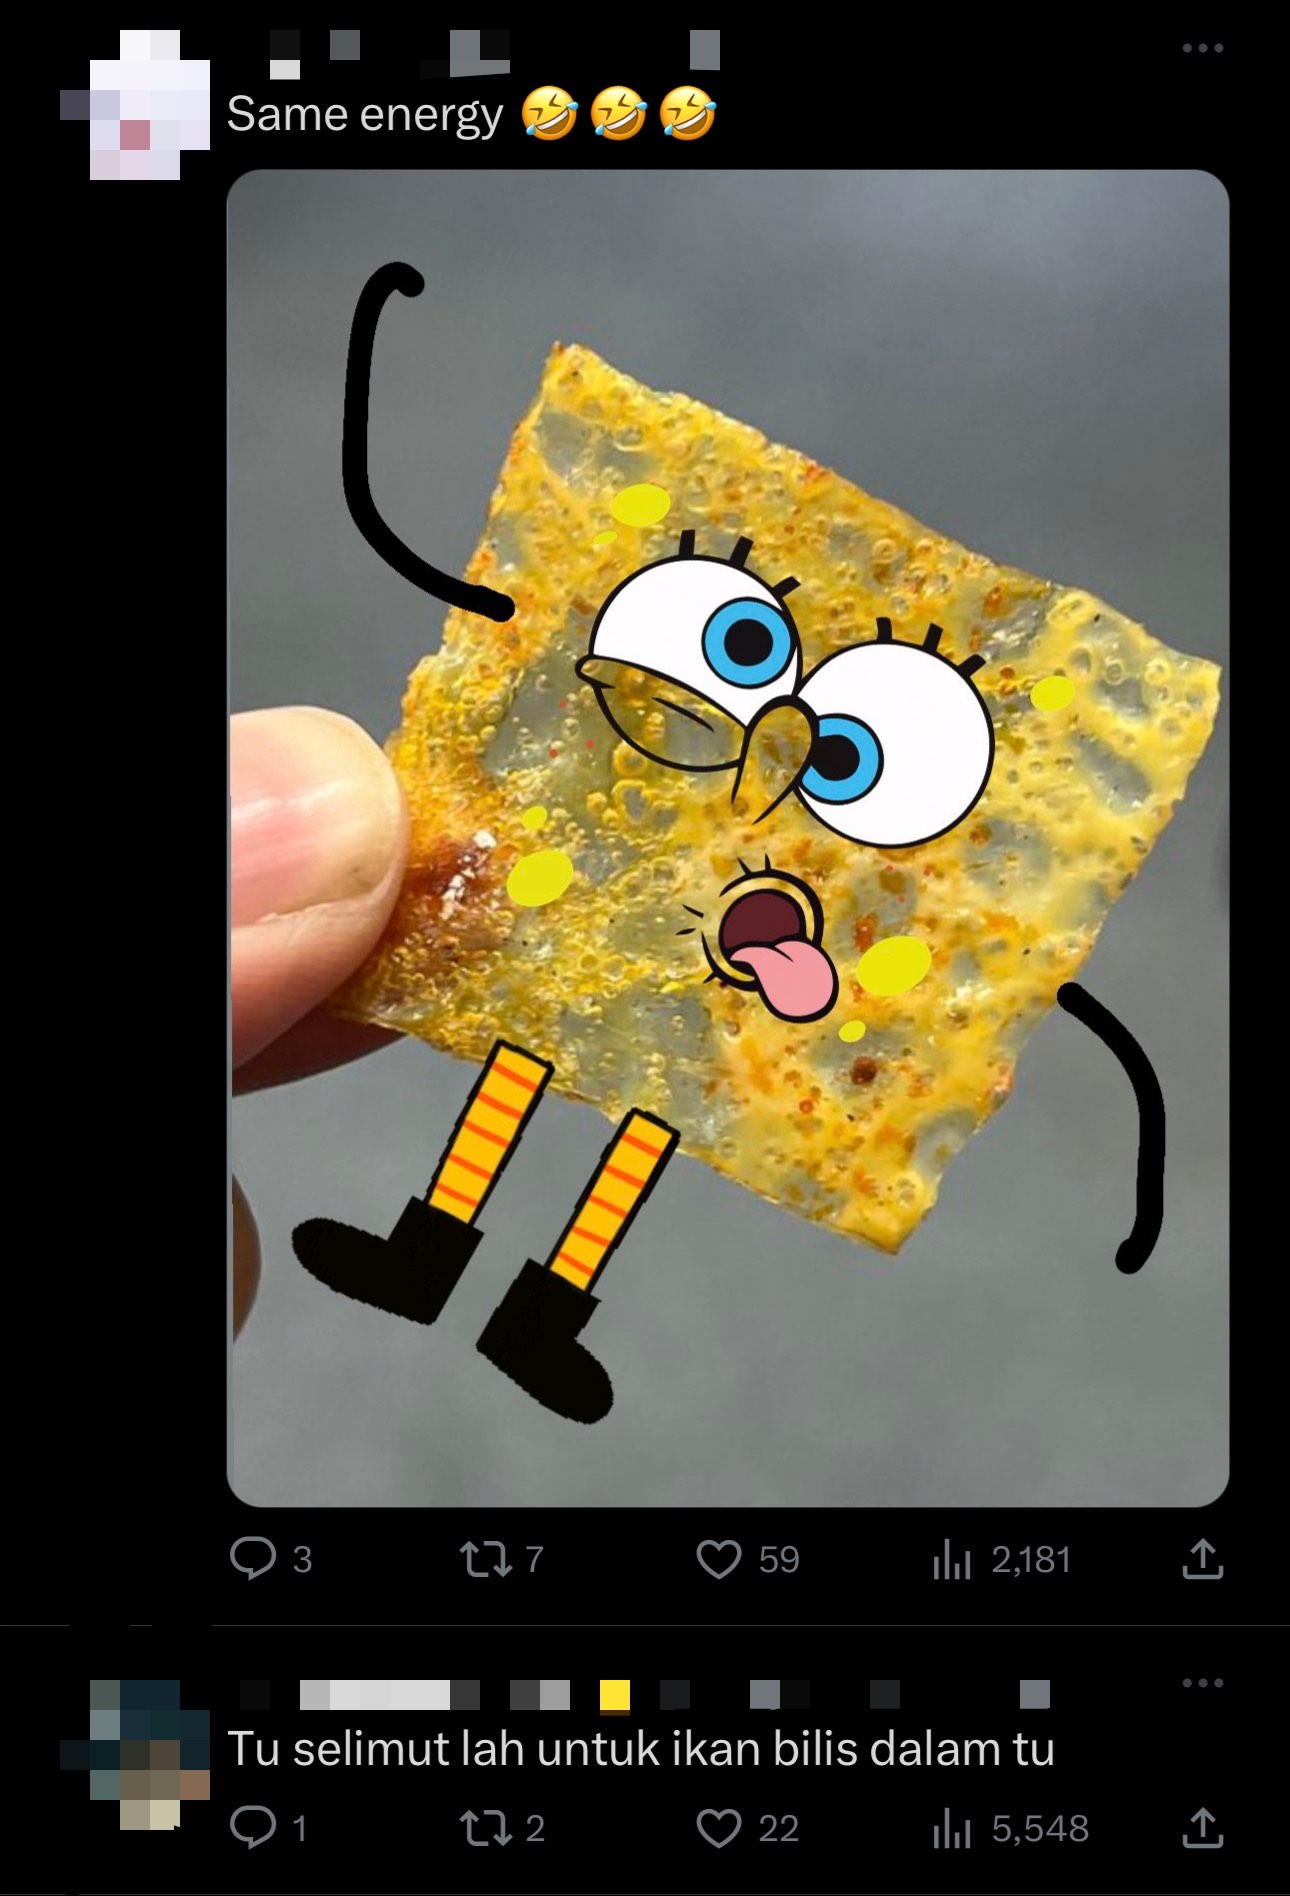 A post screenshotted from twitter where the egg resembles spongebob